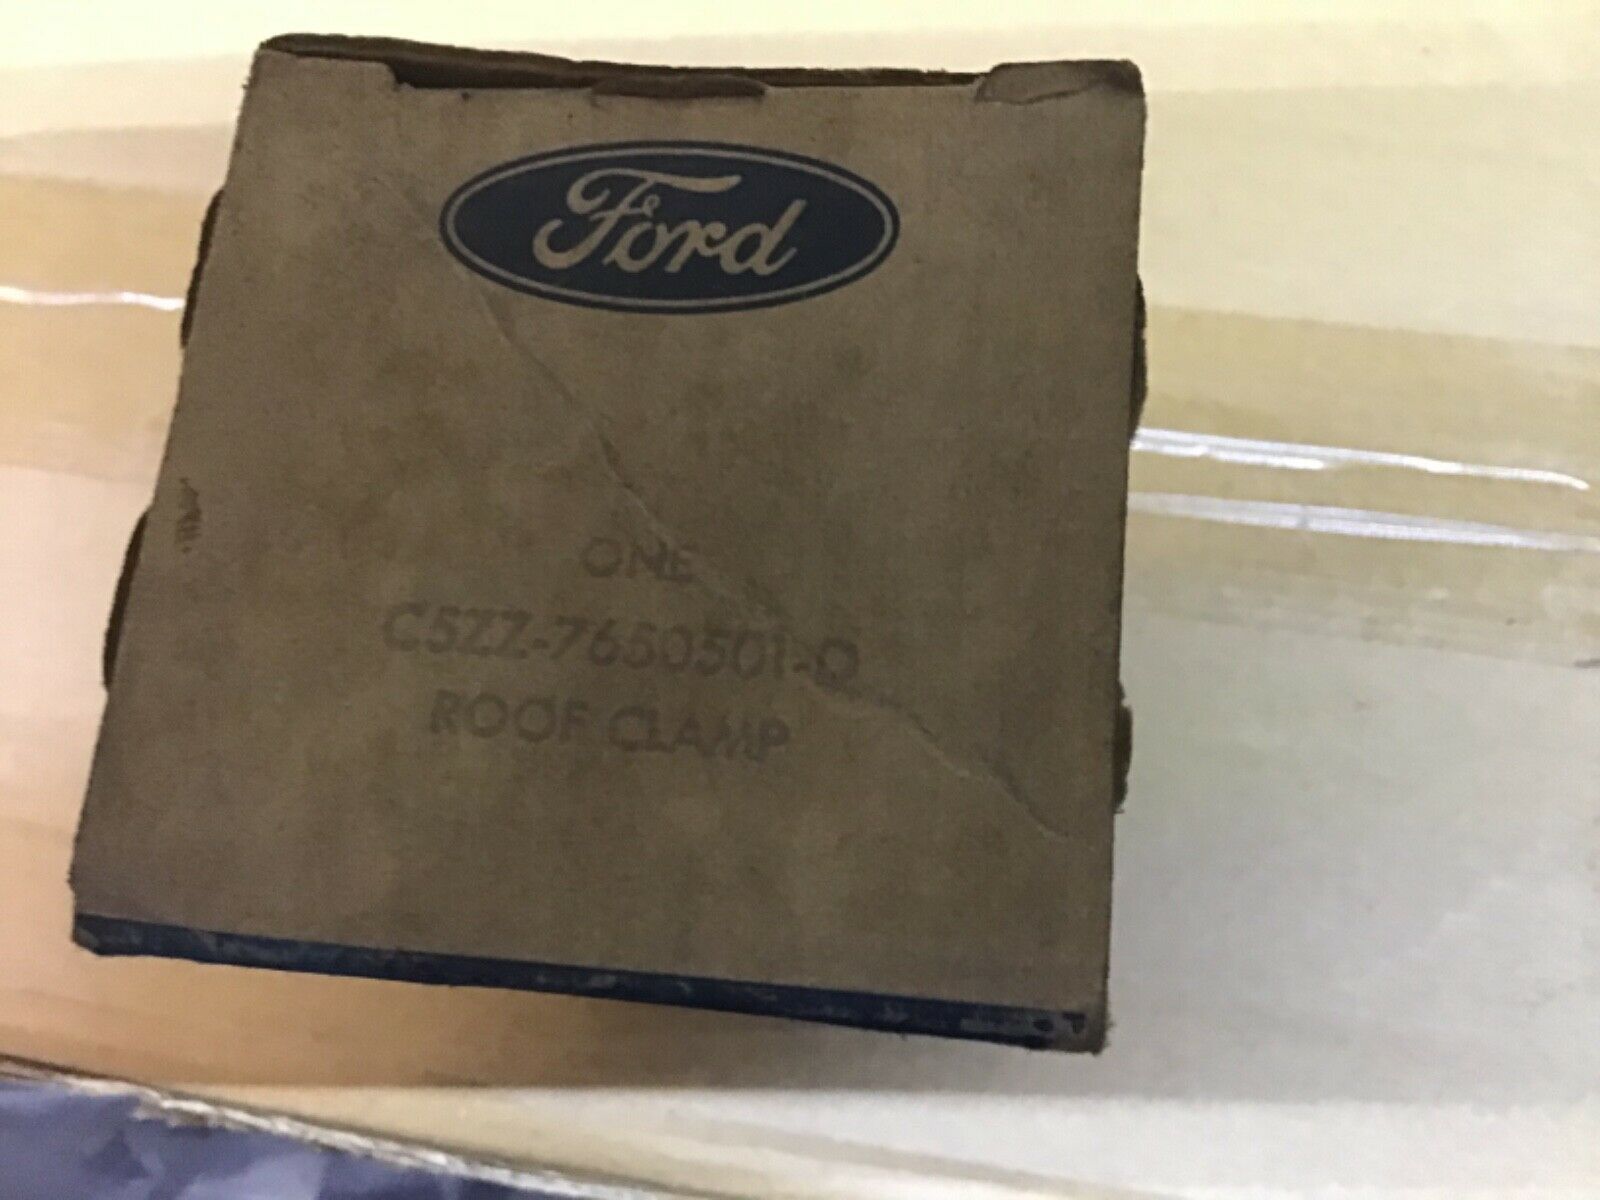 1965 convertible top latch manual top new in ford box GT